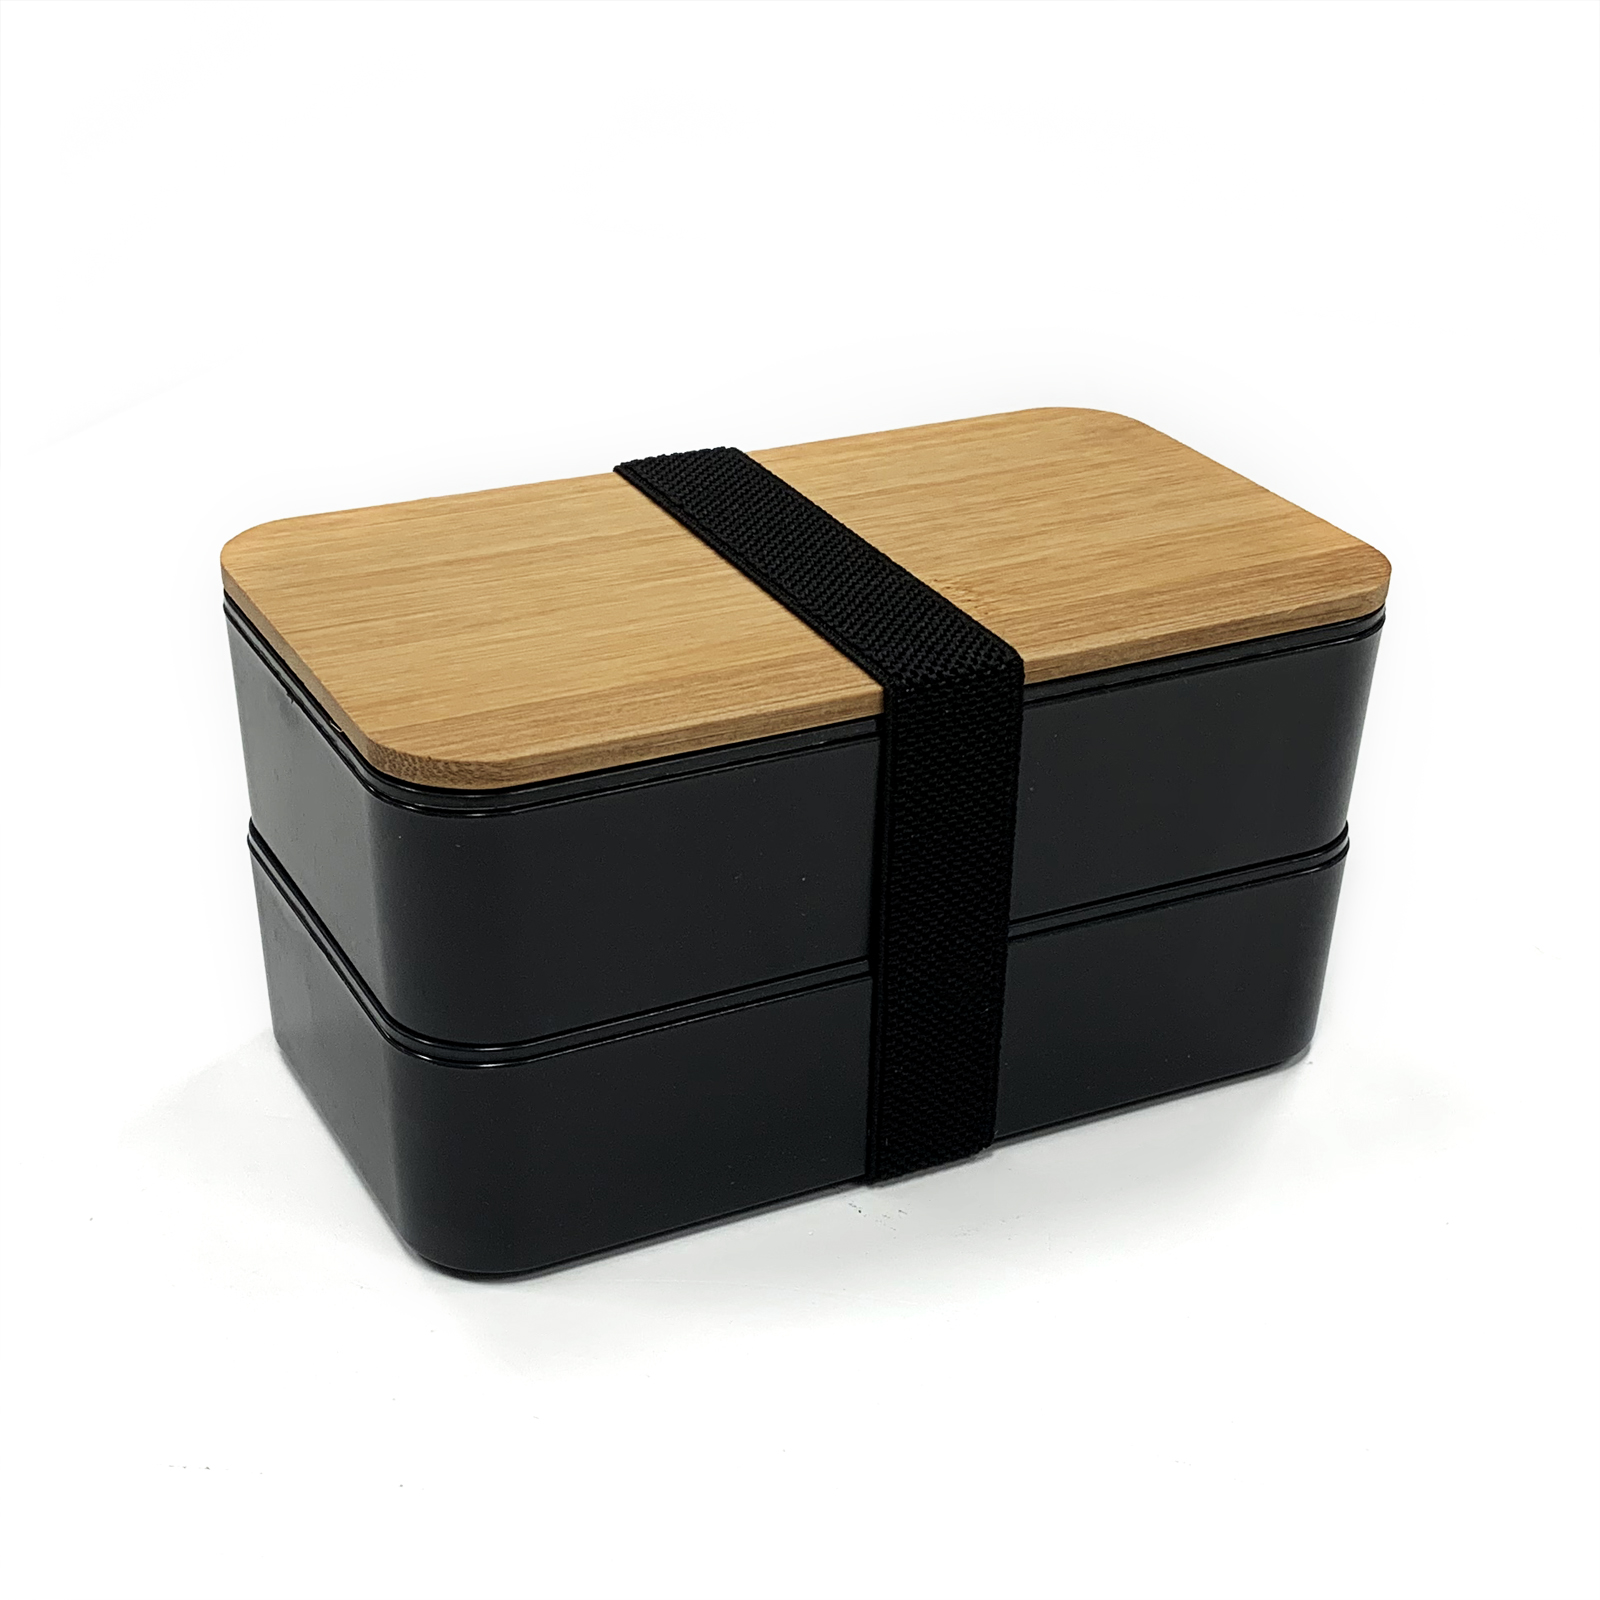 Wheat Straw Bento Box with Bamboo Lid Reusable